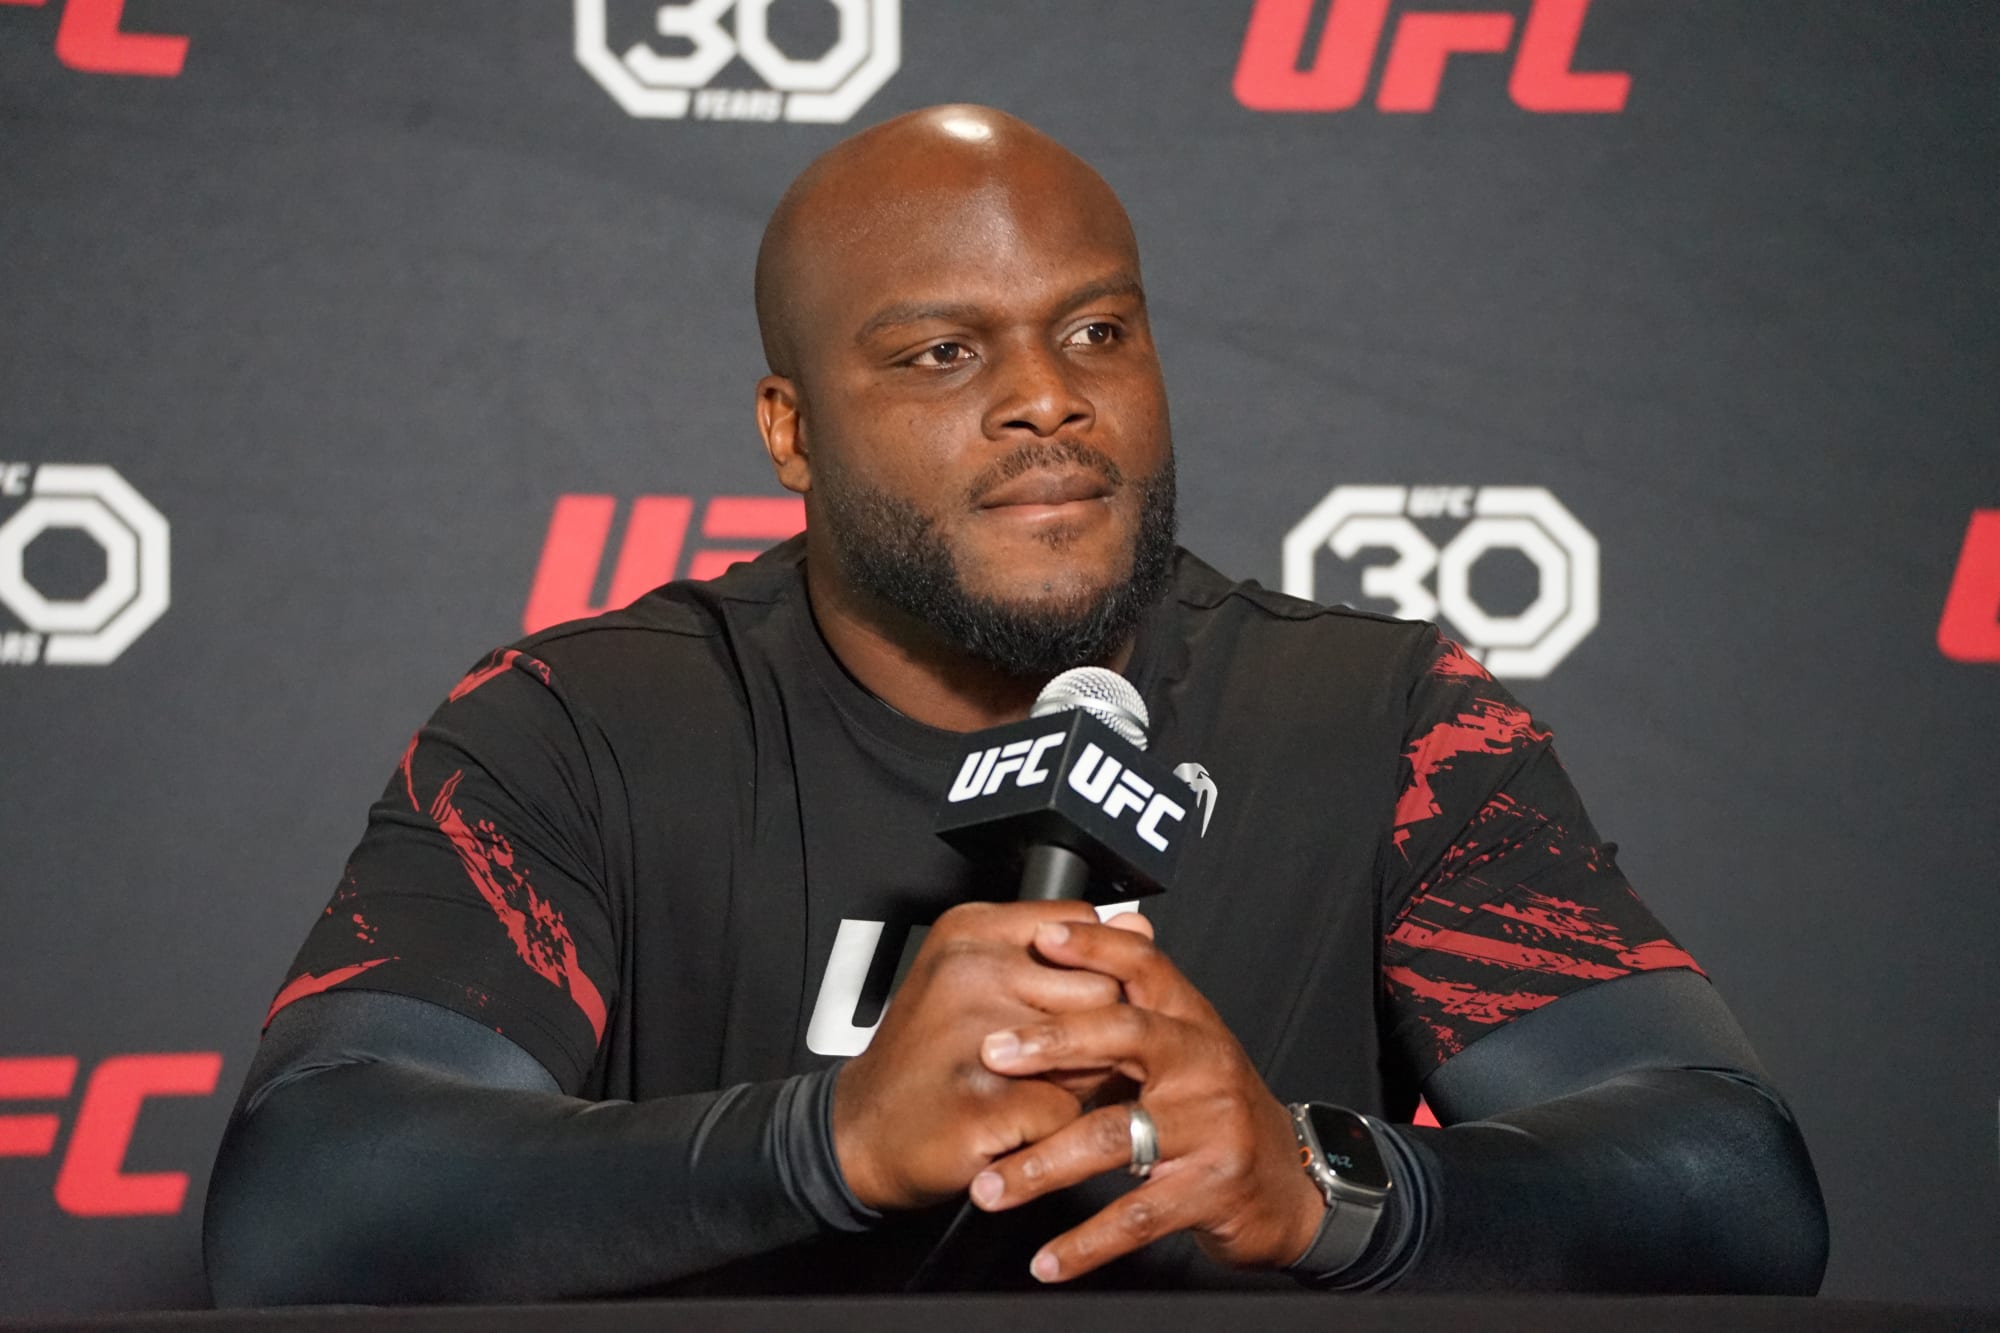 Derrick Lewis looks to prove he can still be in the top 5 at UFC Vegas 68